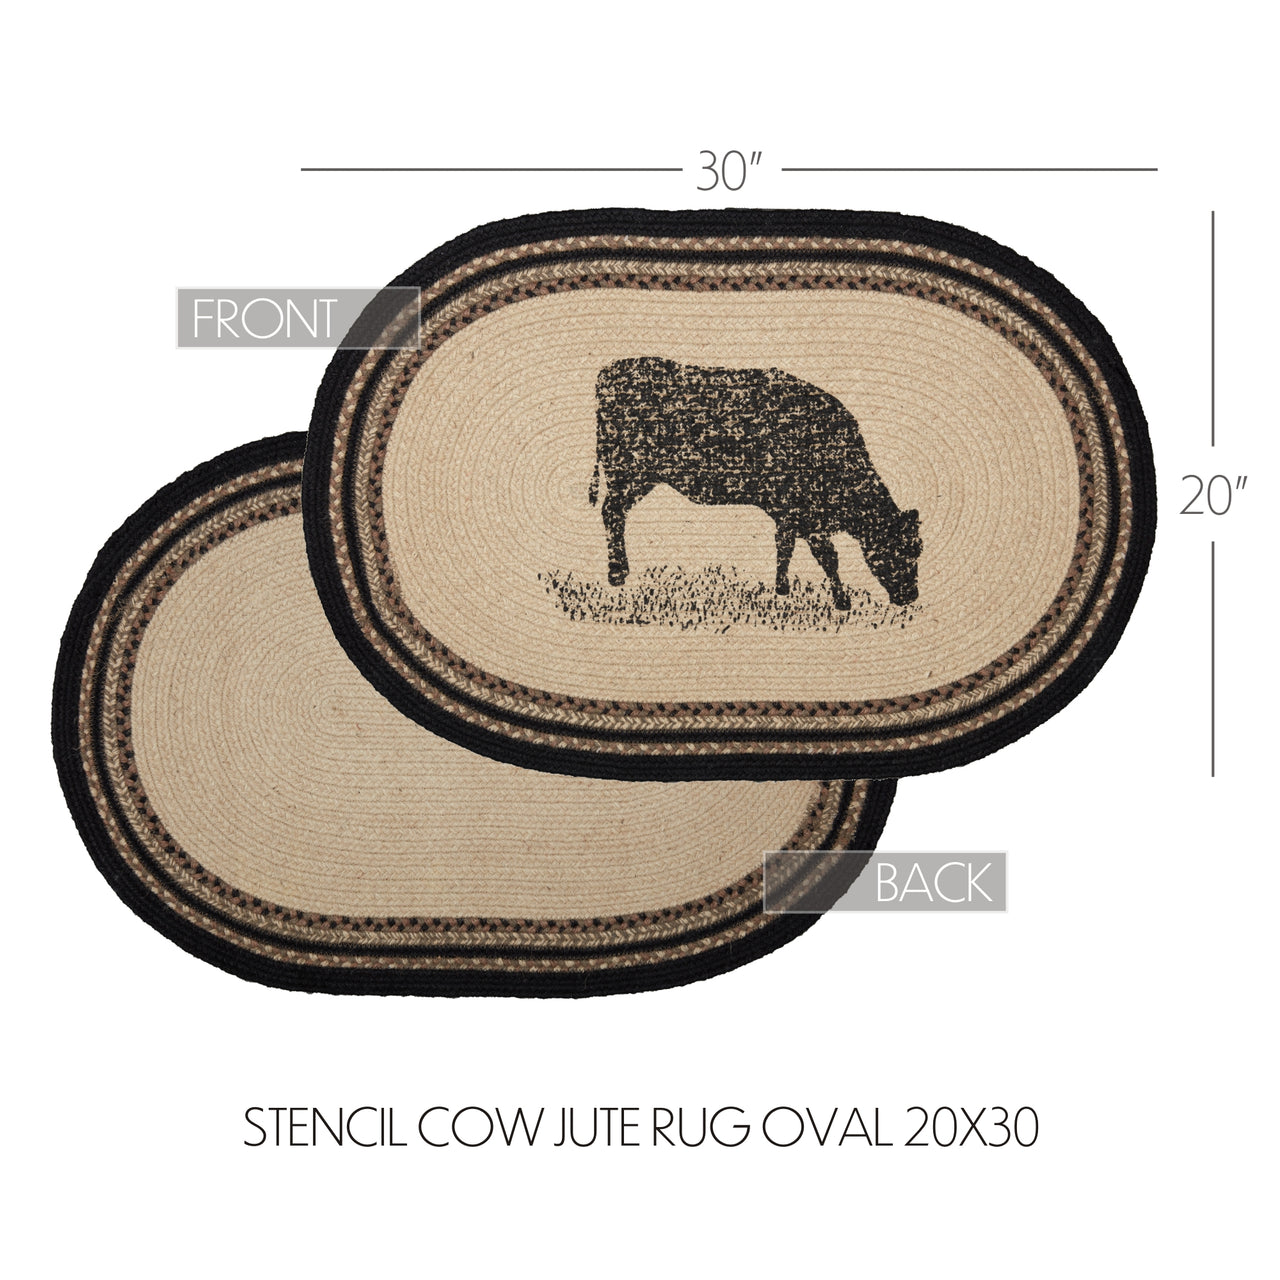 Sawyer Mill Charcoal Cow Jute Braided Rug Oval 20"x30" with Rug Pad VHC Brands